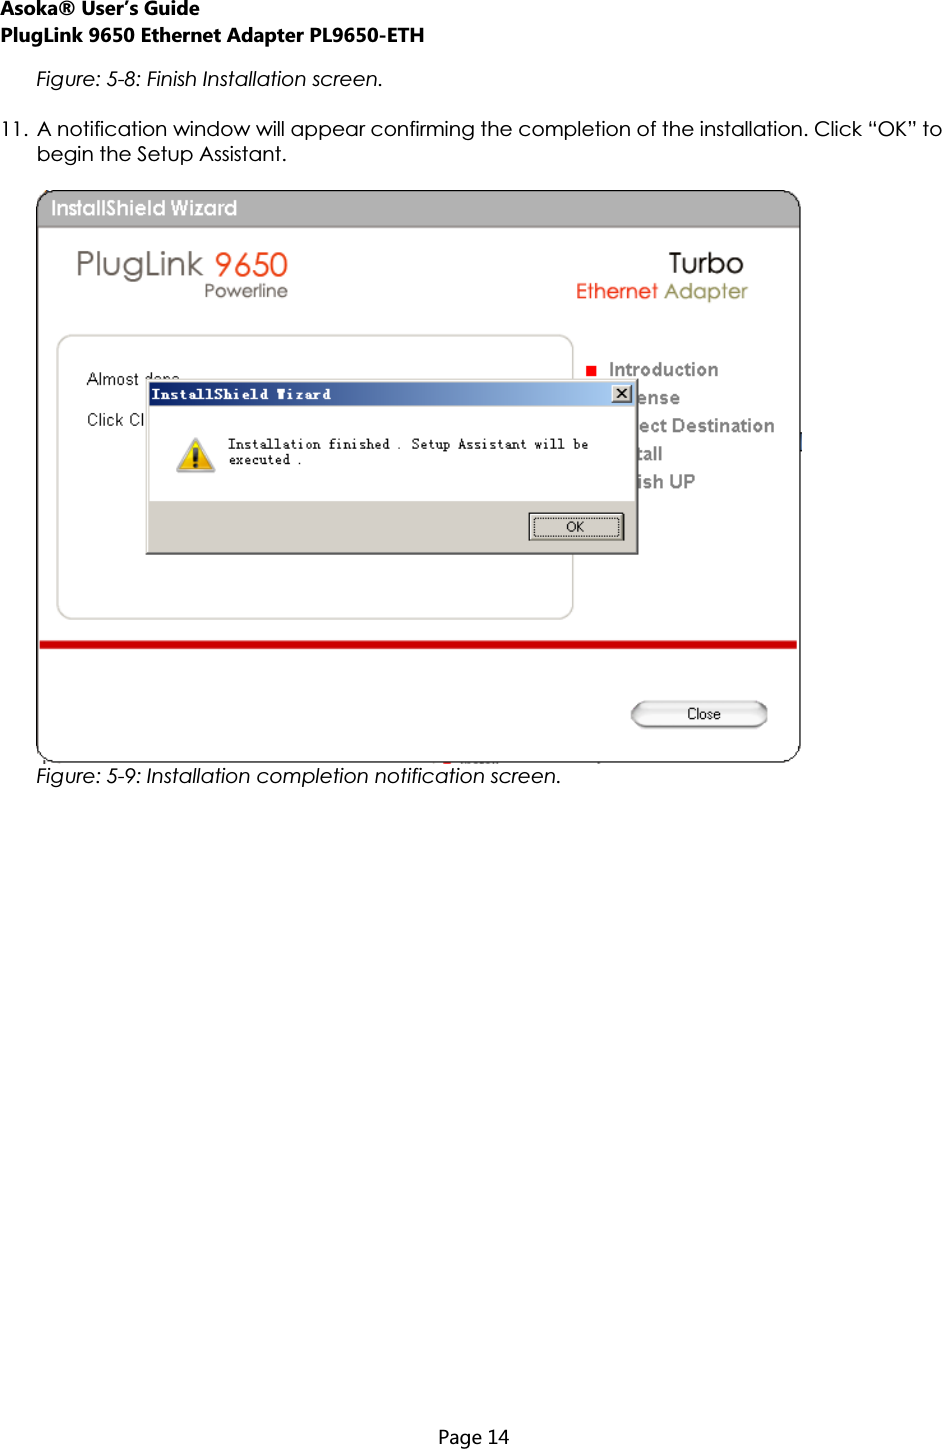 Asoka® User’s Guide PlugLink 9650 Ethernet Adapter PL9650-ETH  Page 14  Figure: 5-8: Finish Installation screen.11. A notification window will appear confirming the completion of the installation. Click “OK” to begin the Setup Assistant. Figure: 5-9: Installation completion notification screen.